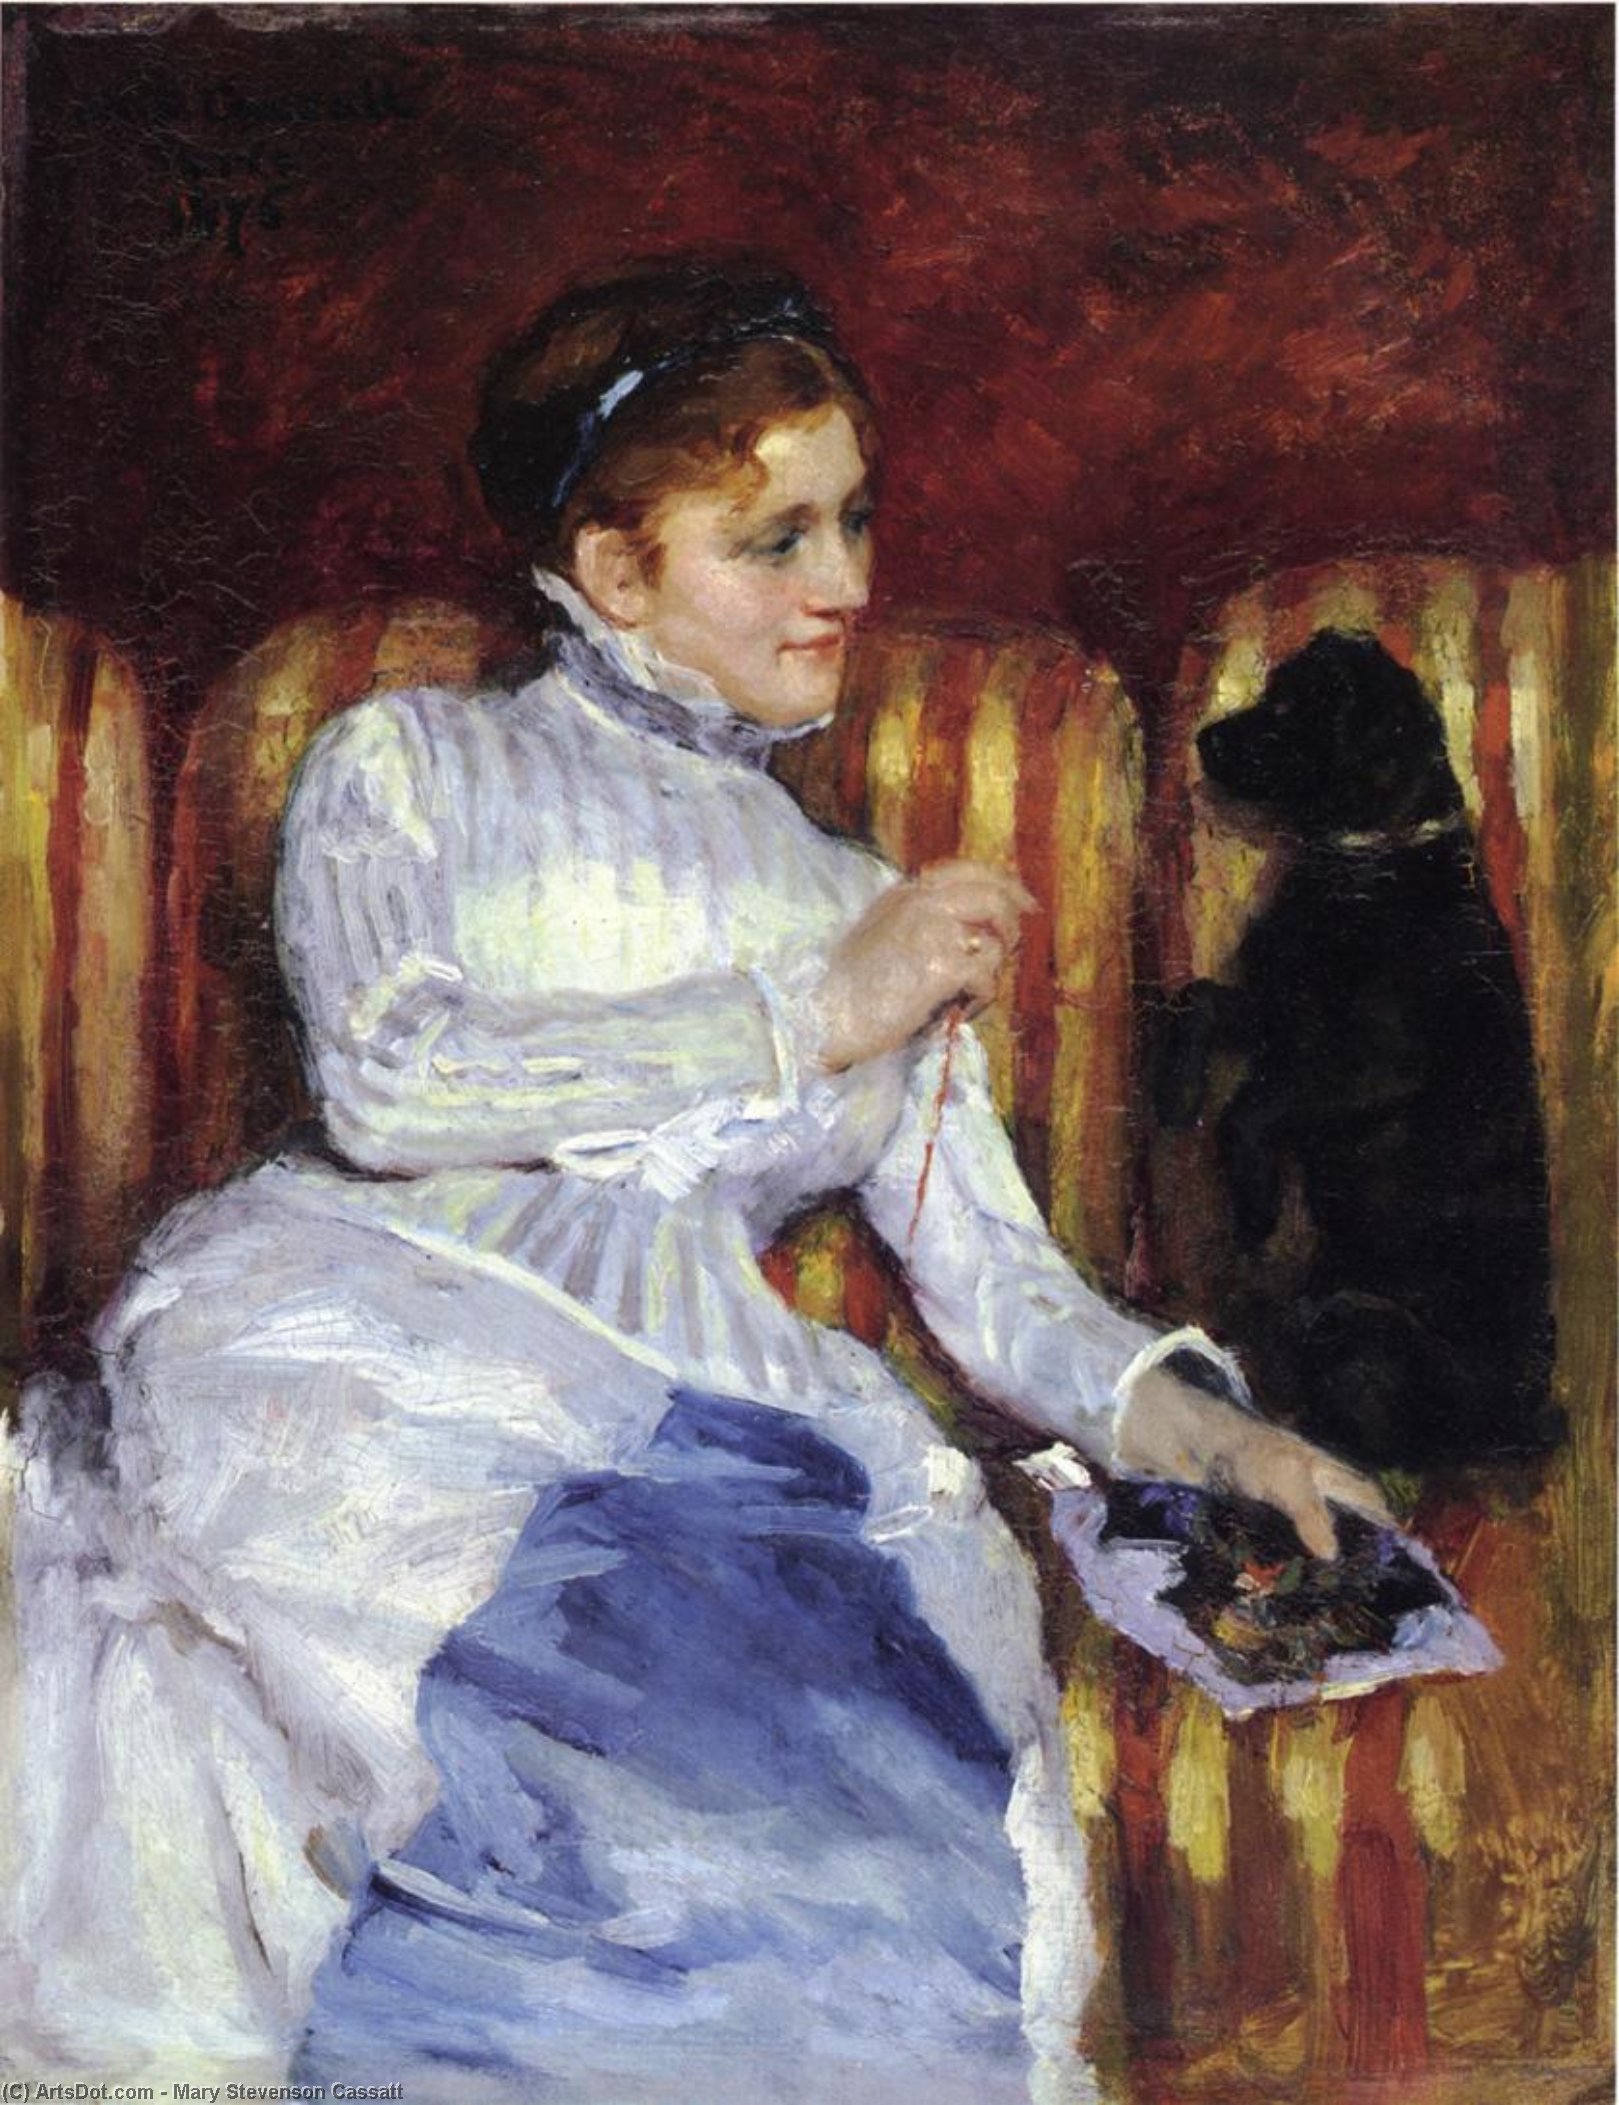 WikiOO.org - Güzel Sanatlar Ansiklopedisi - Resim, Resimler Mary Stevenson Cassatt - Woman on a Striped with a Dog (also known as Young Woman on a Striped Sofa with Her Dog)